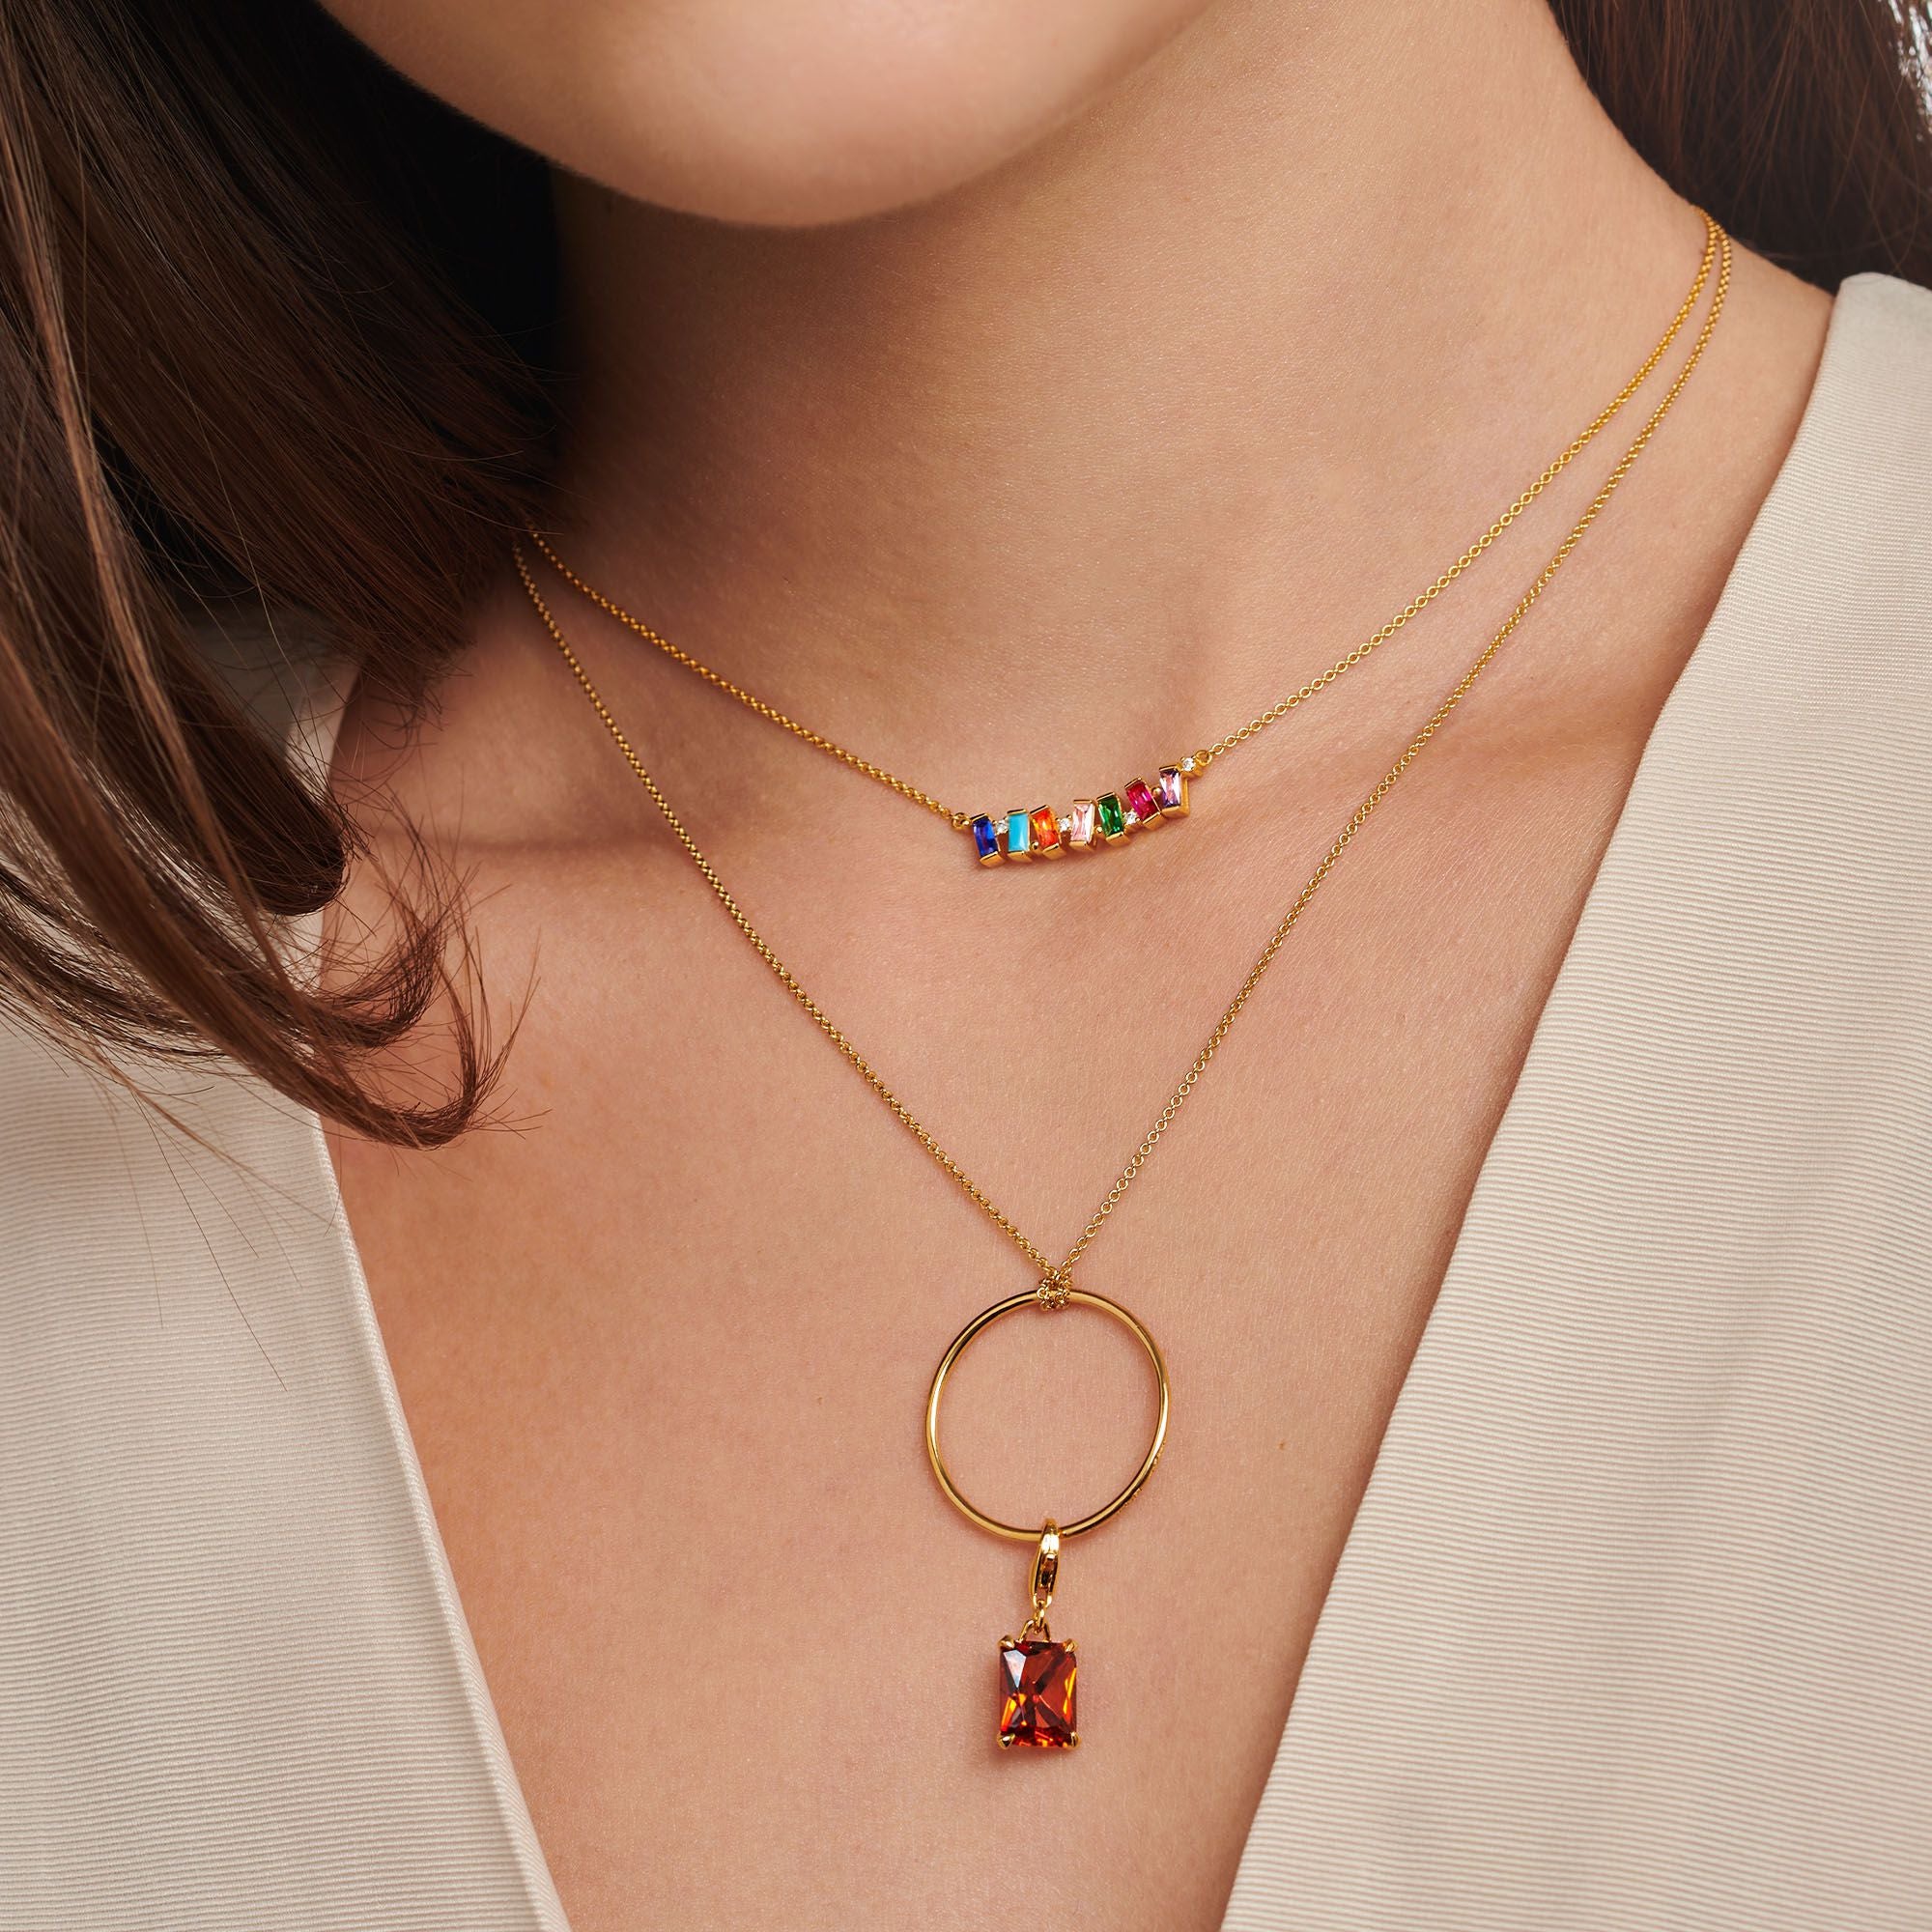 Rainbow Stone Necklace: A Colorful Elegance Statement in Sterling Silv